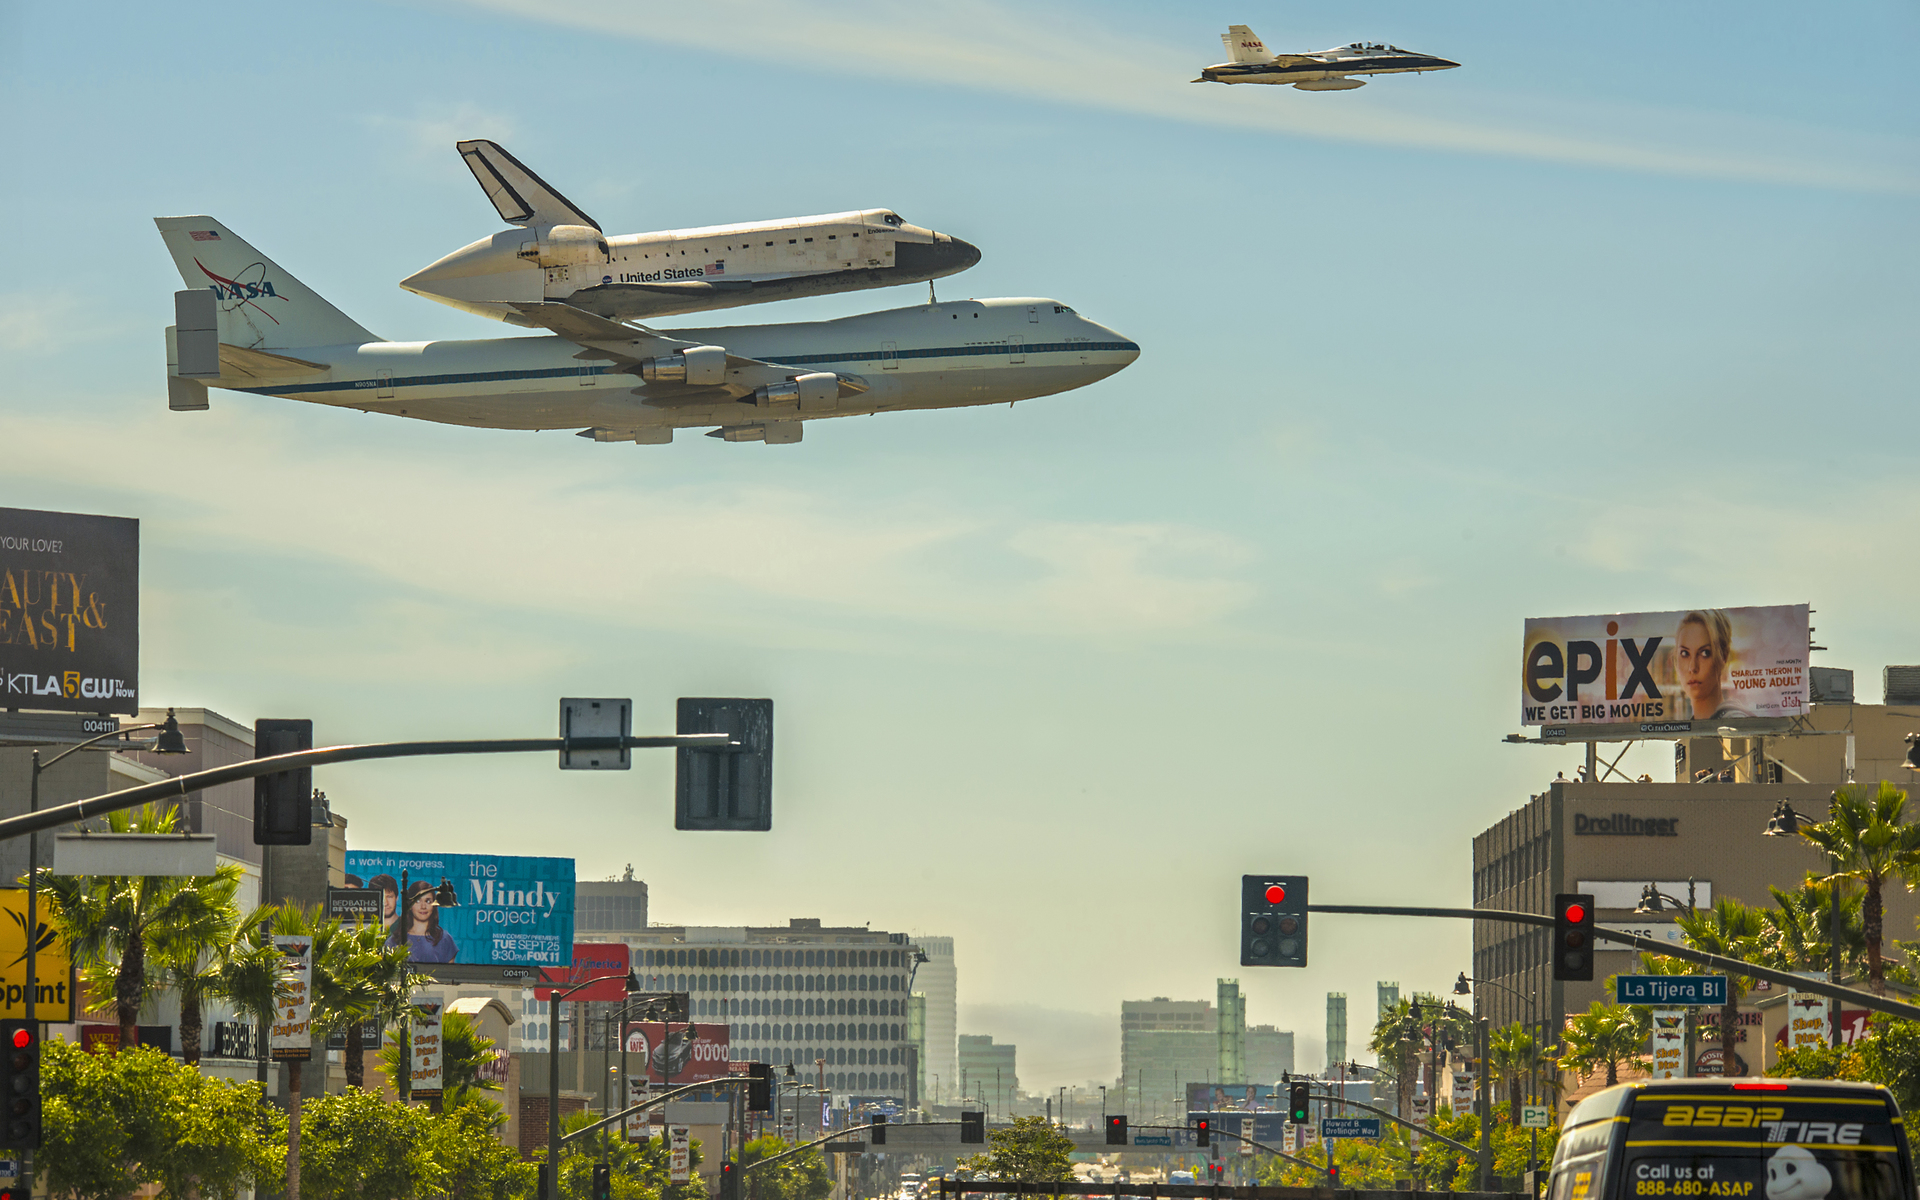 vehicles, space shuttle endeavour, aircraft, airplane, jet, nasa, shuttle, space shuttle, space shuttles iphone wallpaper